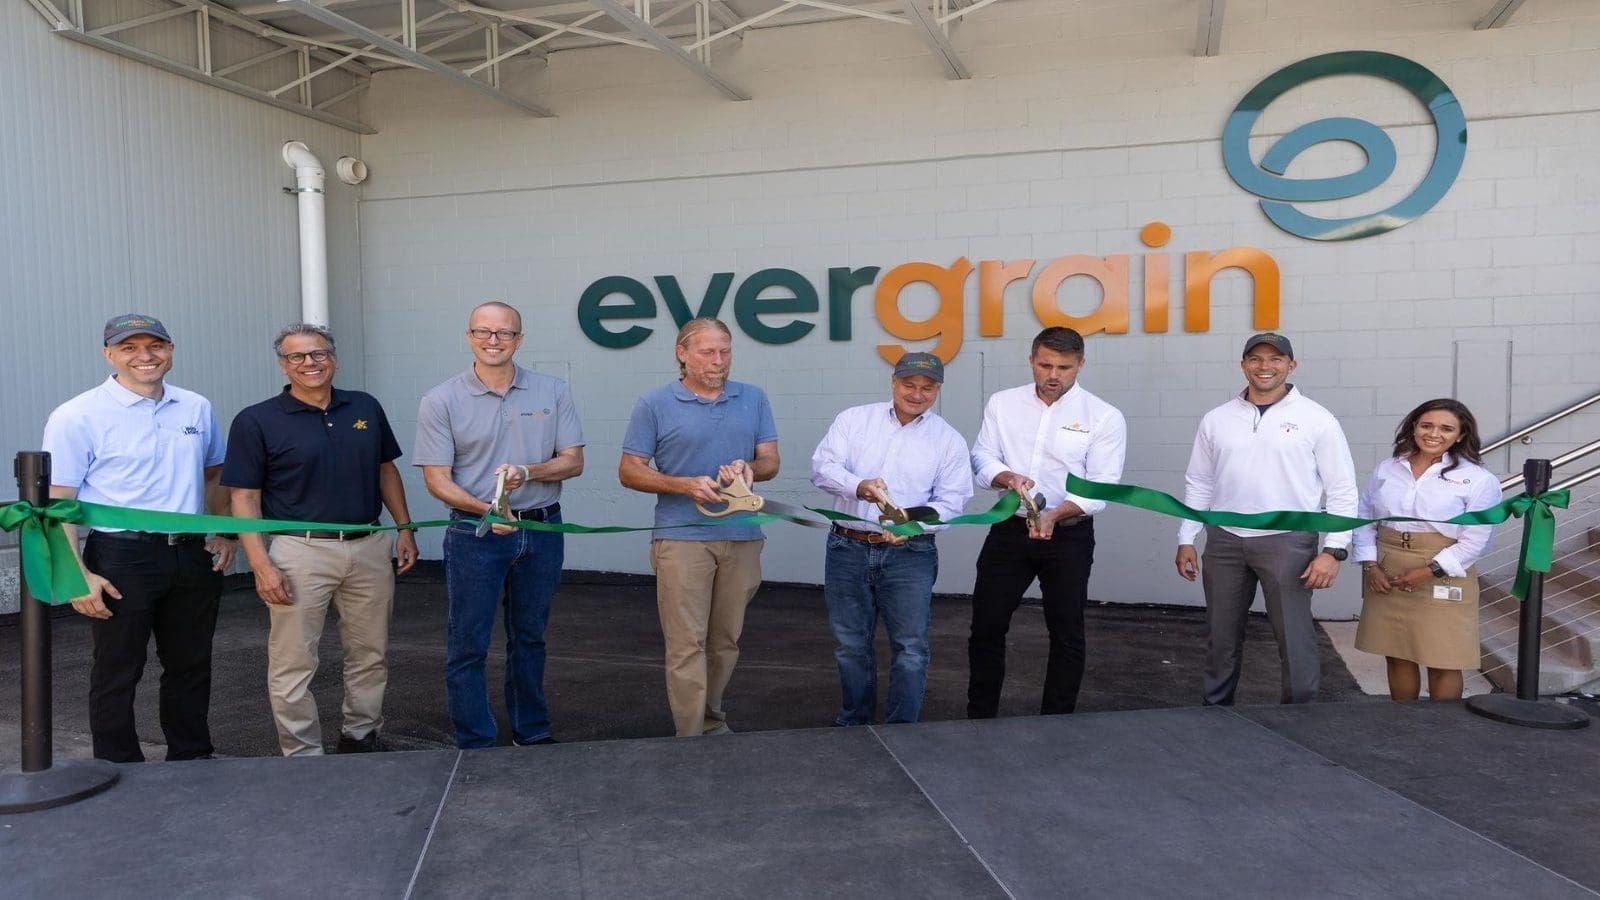 EverGrain opens first major US plant protein production facility